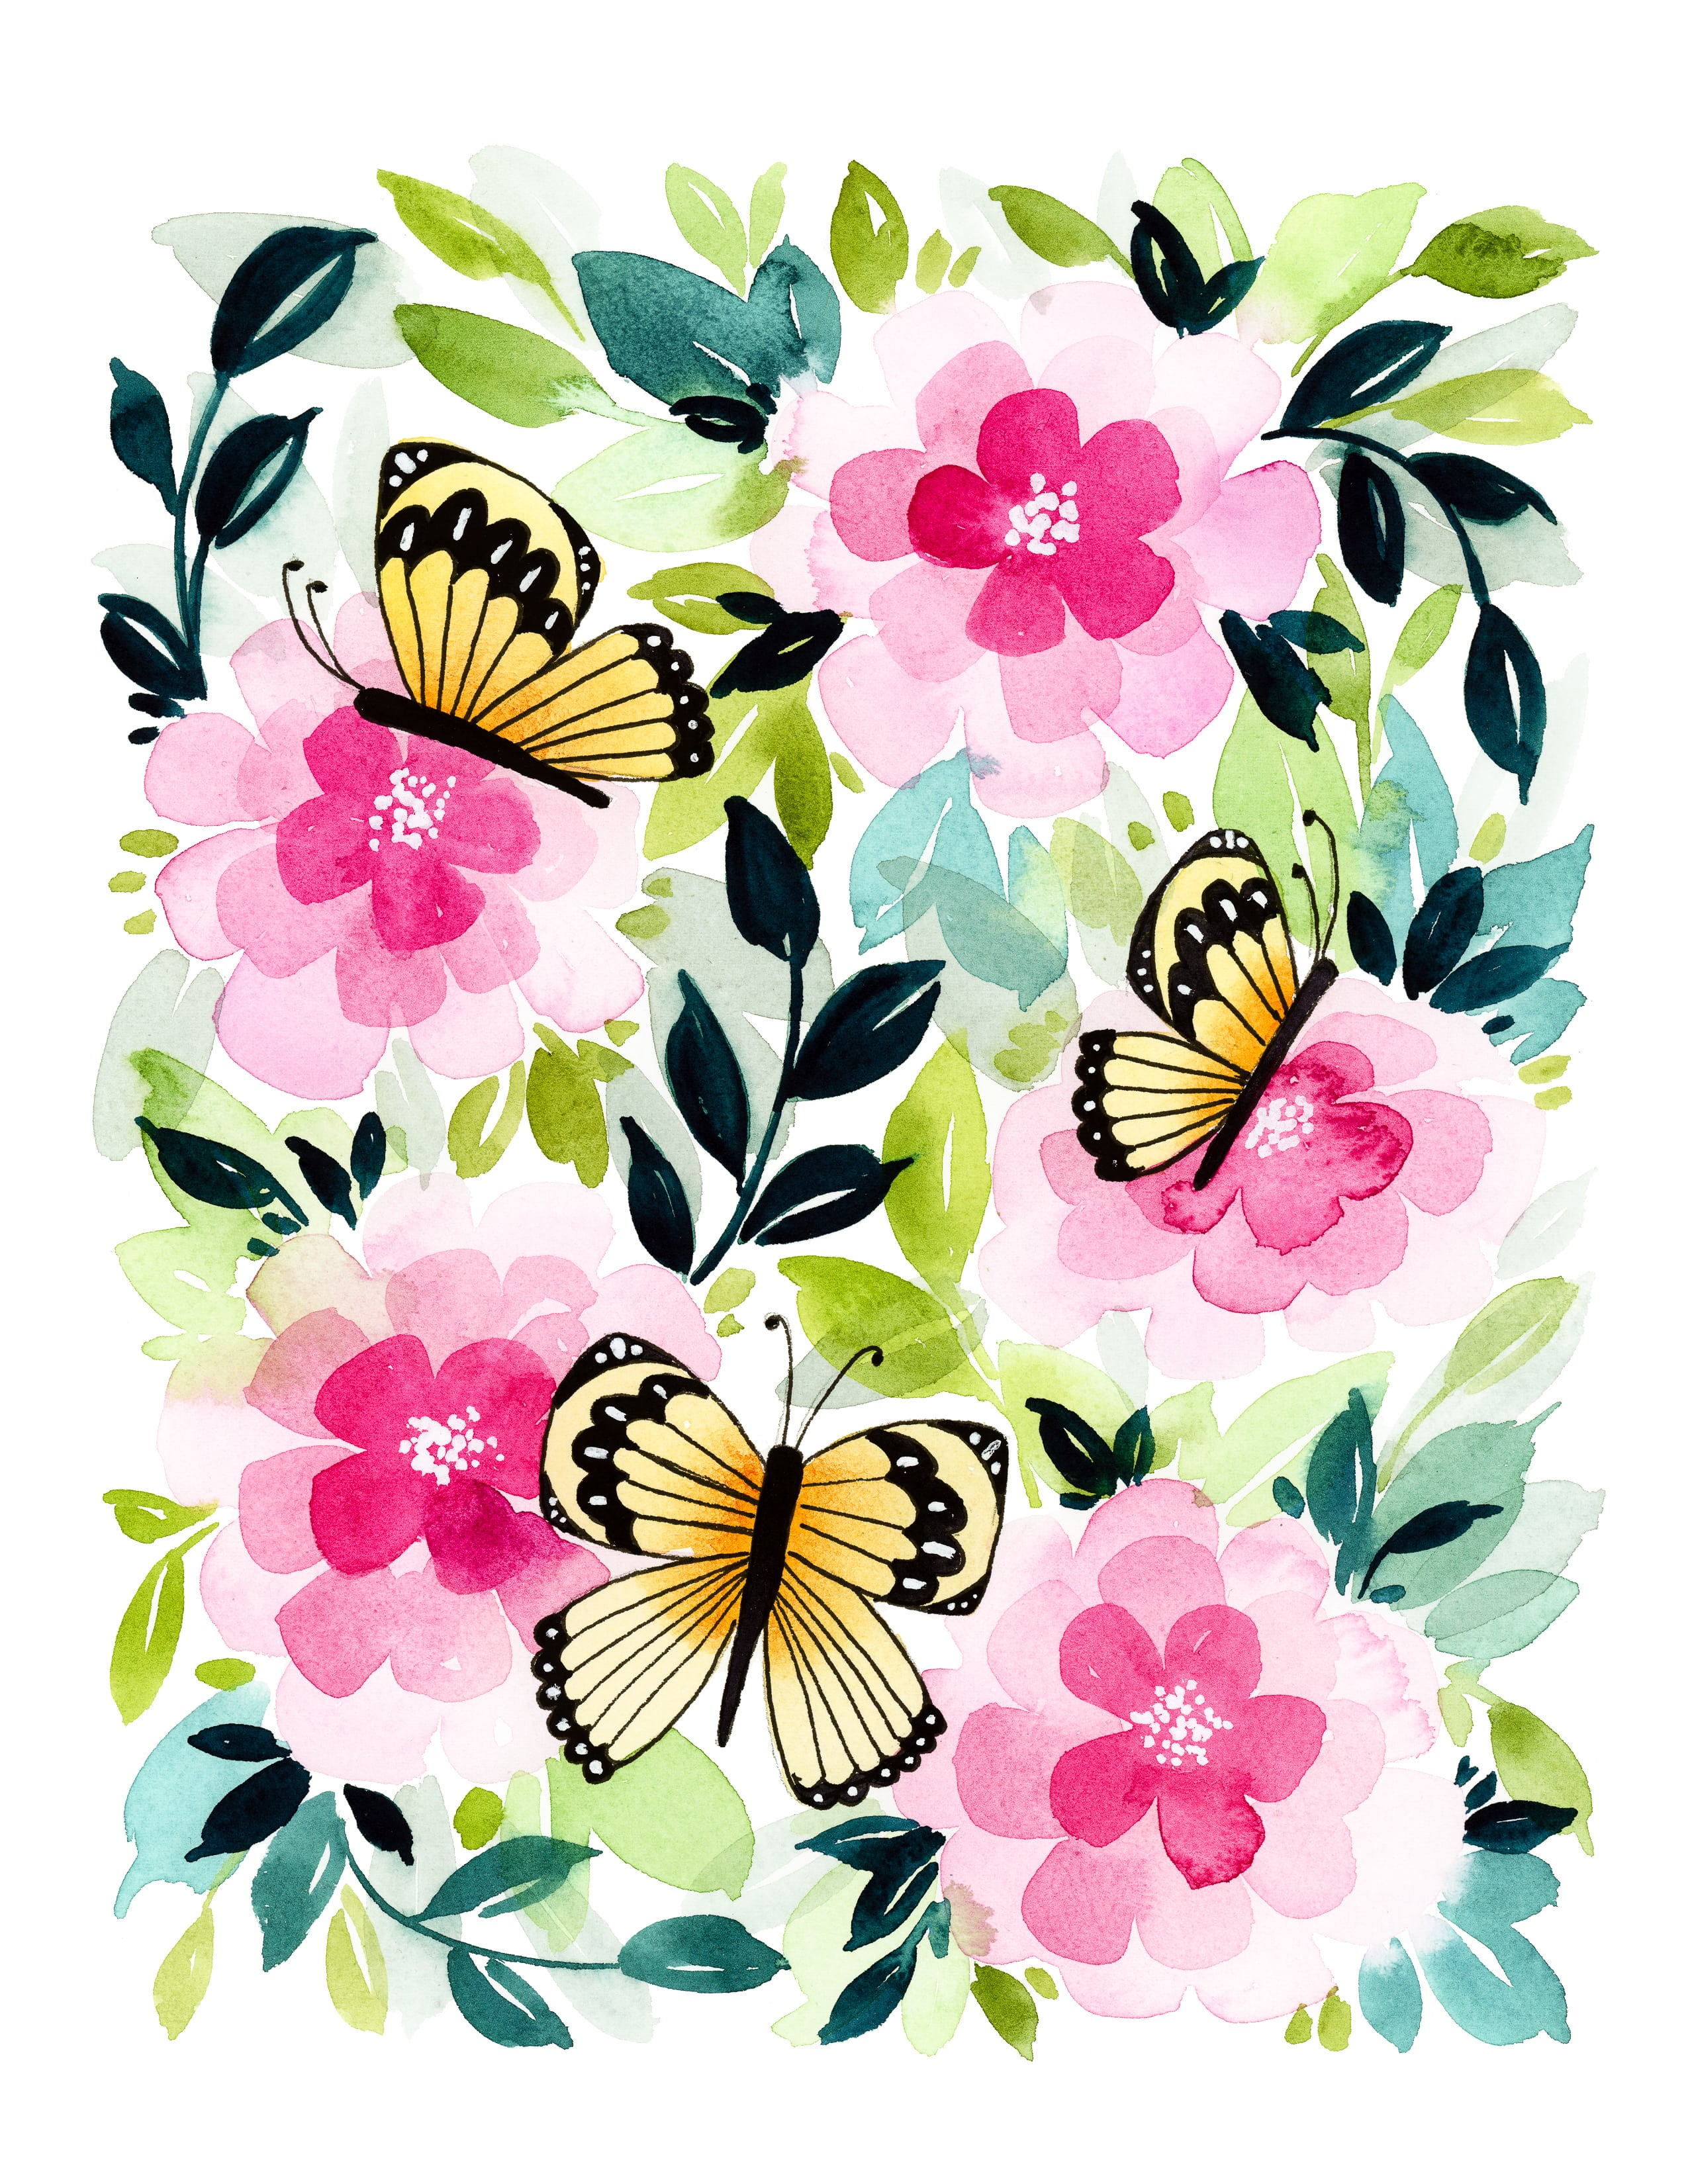 Free-Printable-Butterfly-Garden-Card-1 - Tinselbox - Free Printable Butterfly